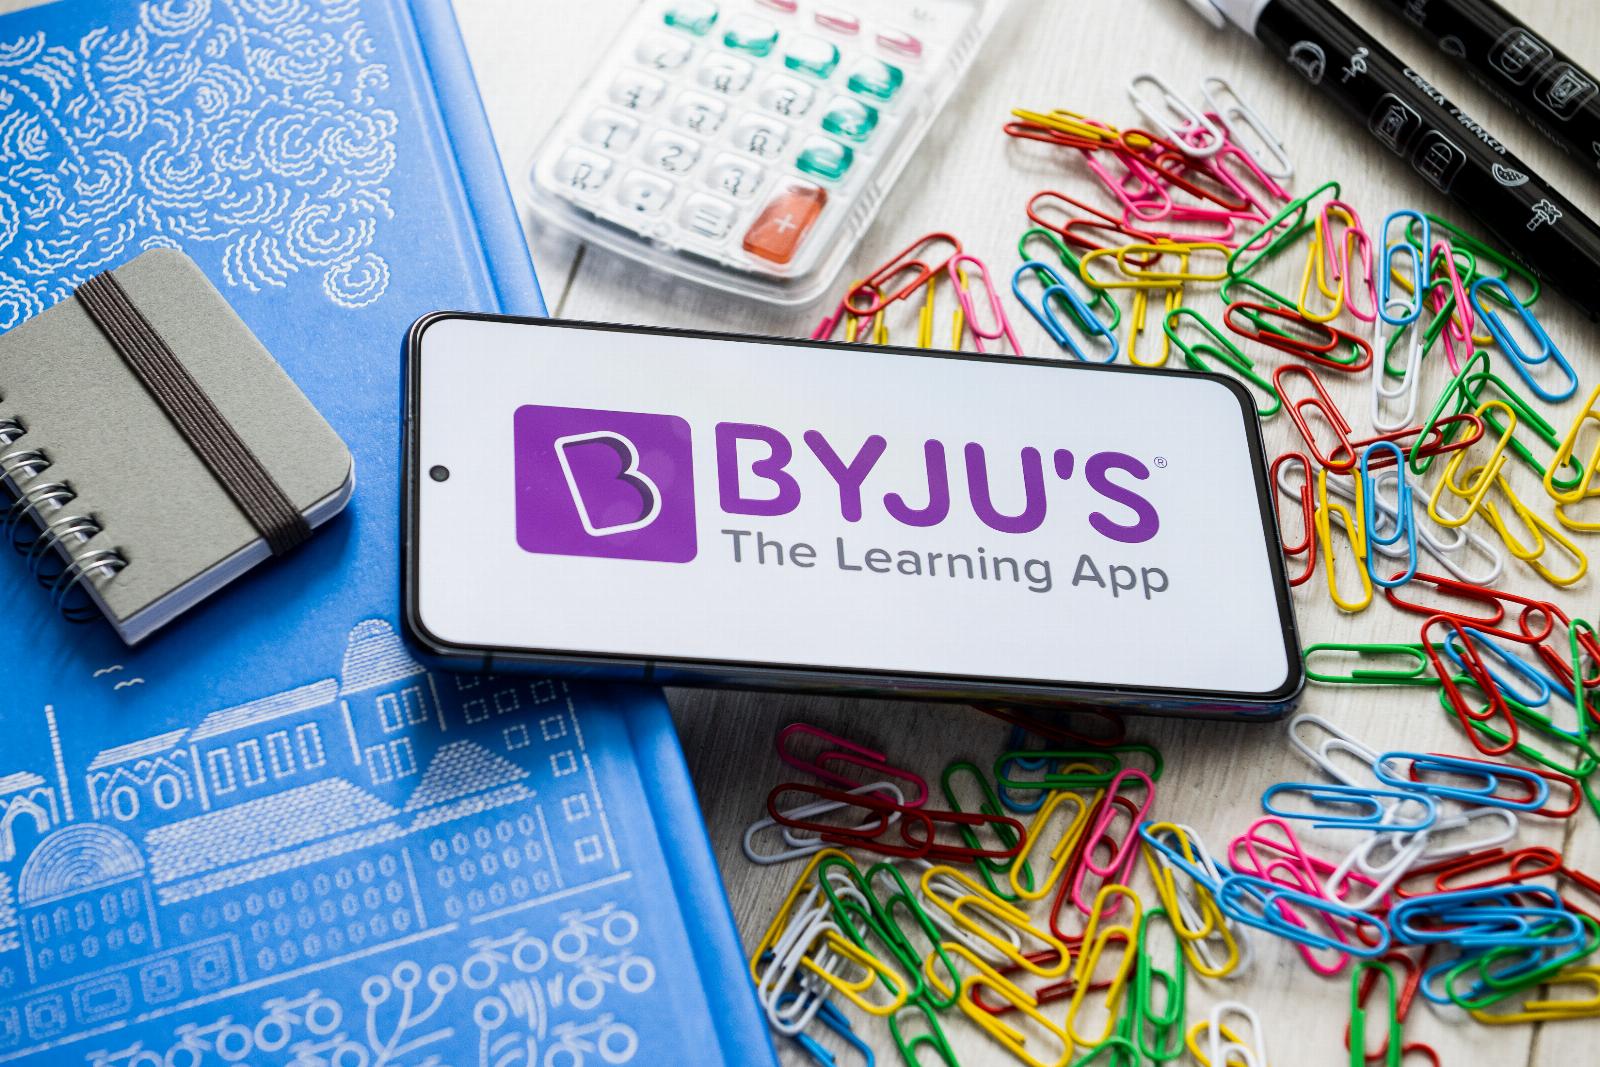 Byju’s says restructuring businesses